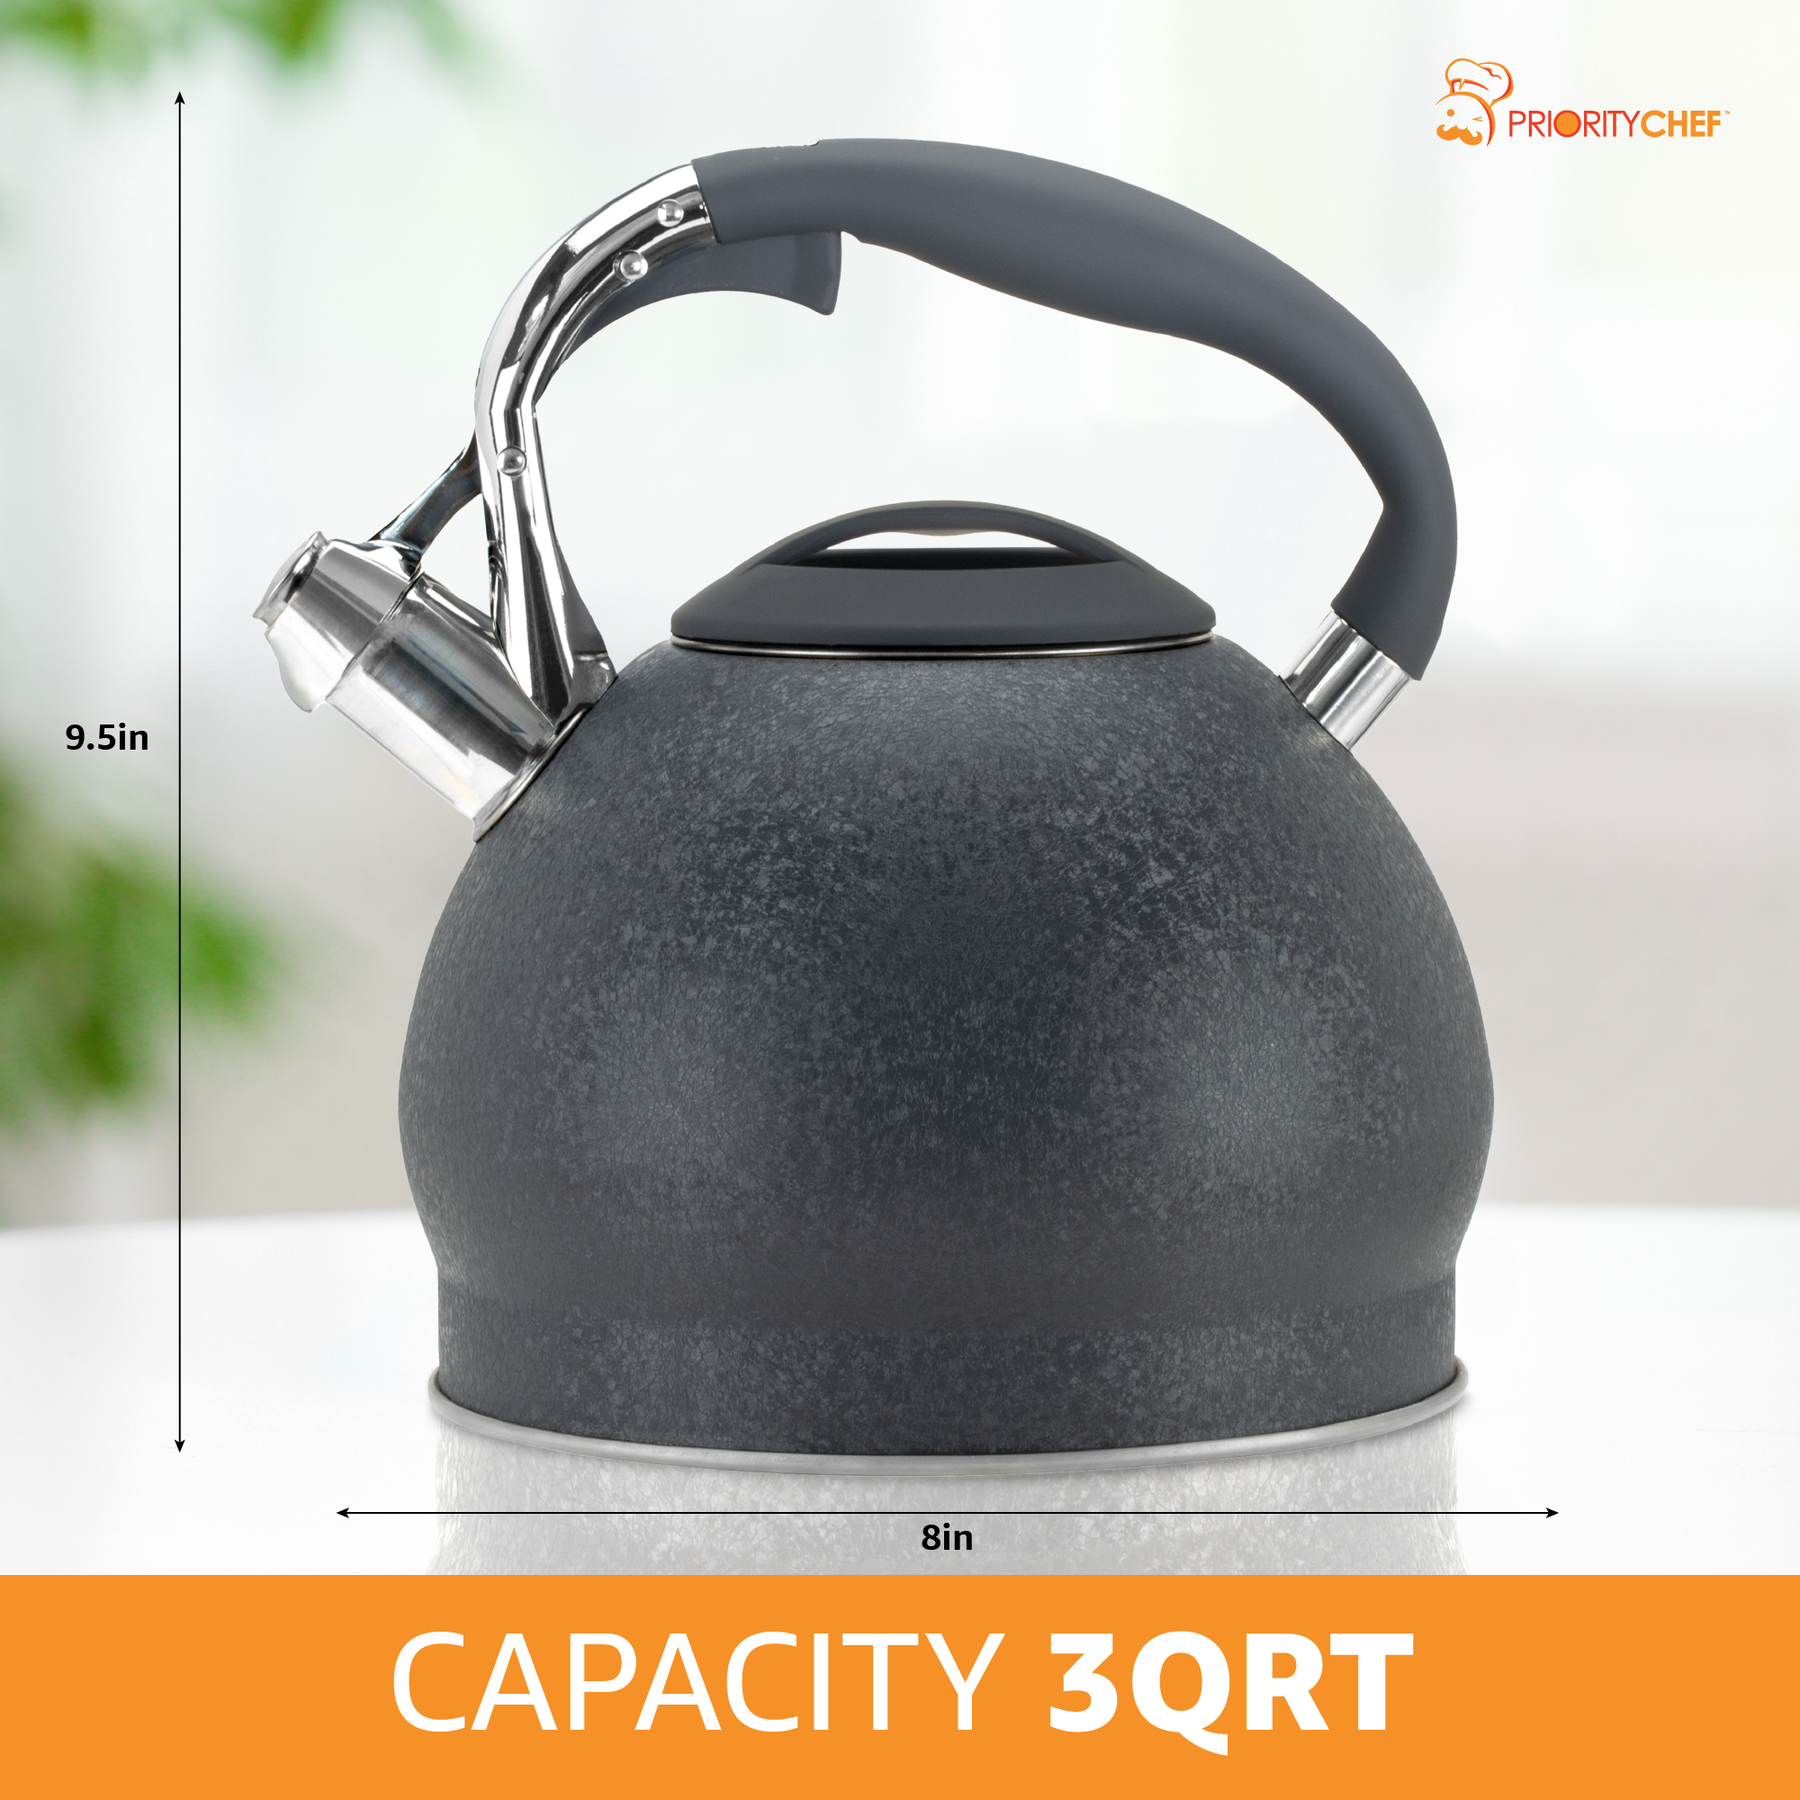 Chef's Choice Electric Tea Kettle, Grey, 7 Cup